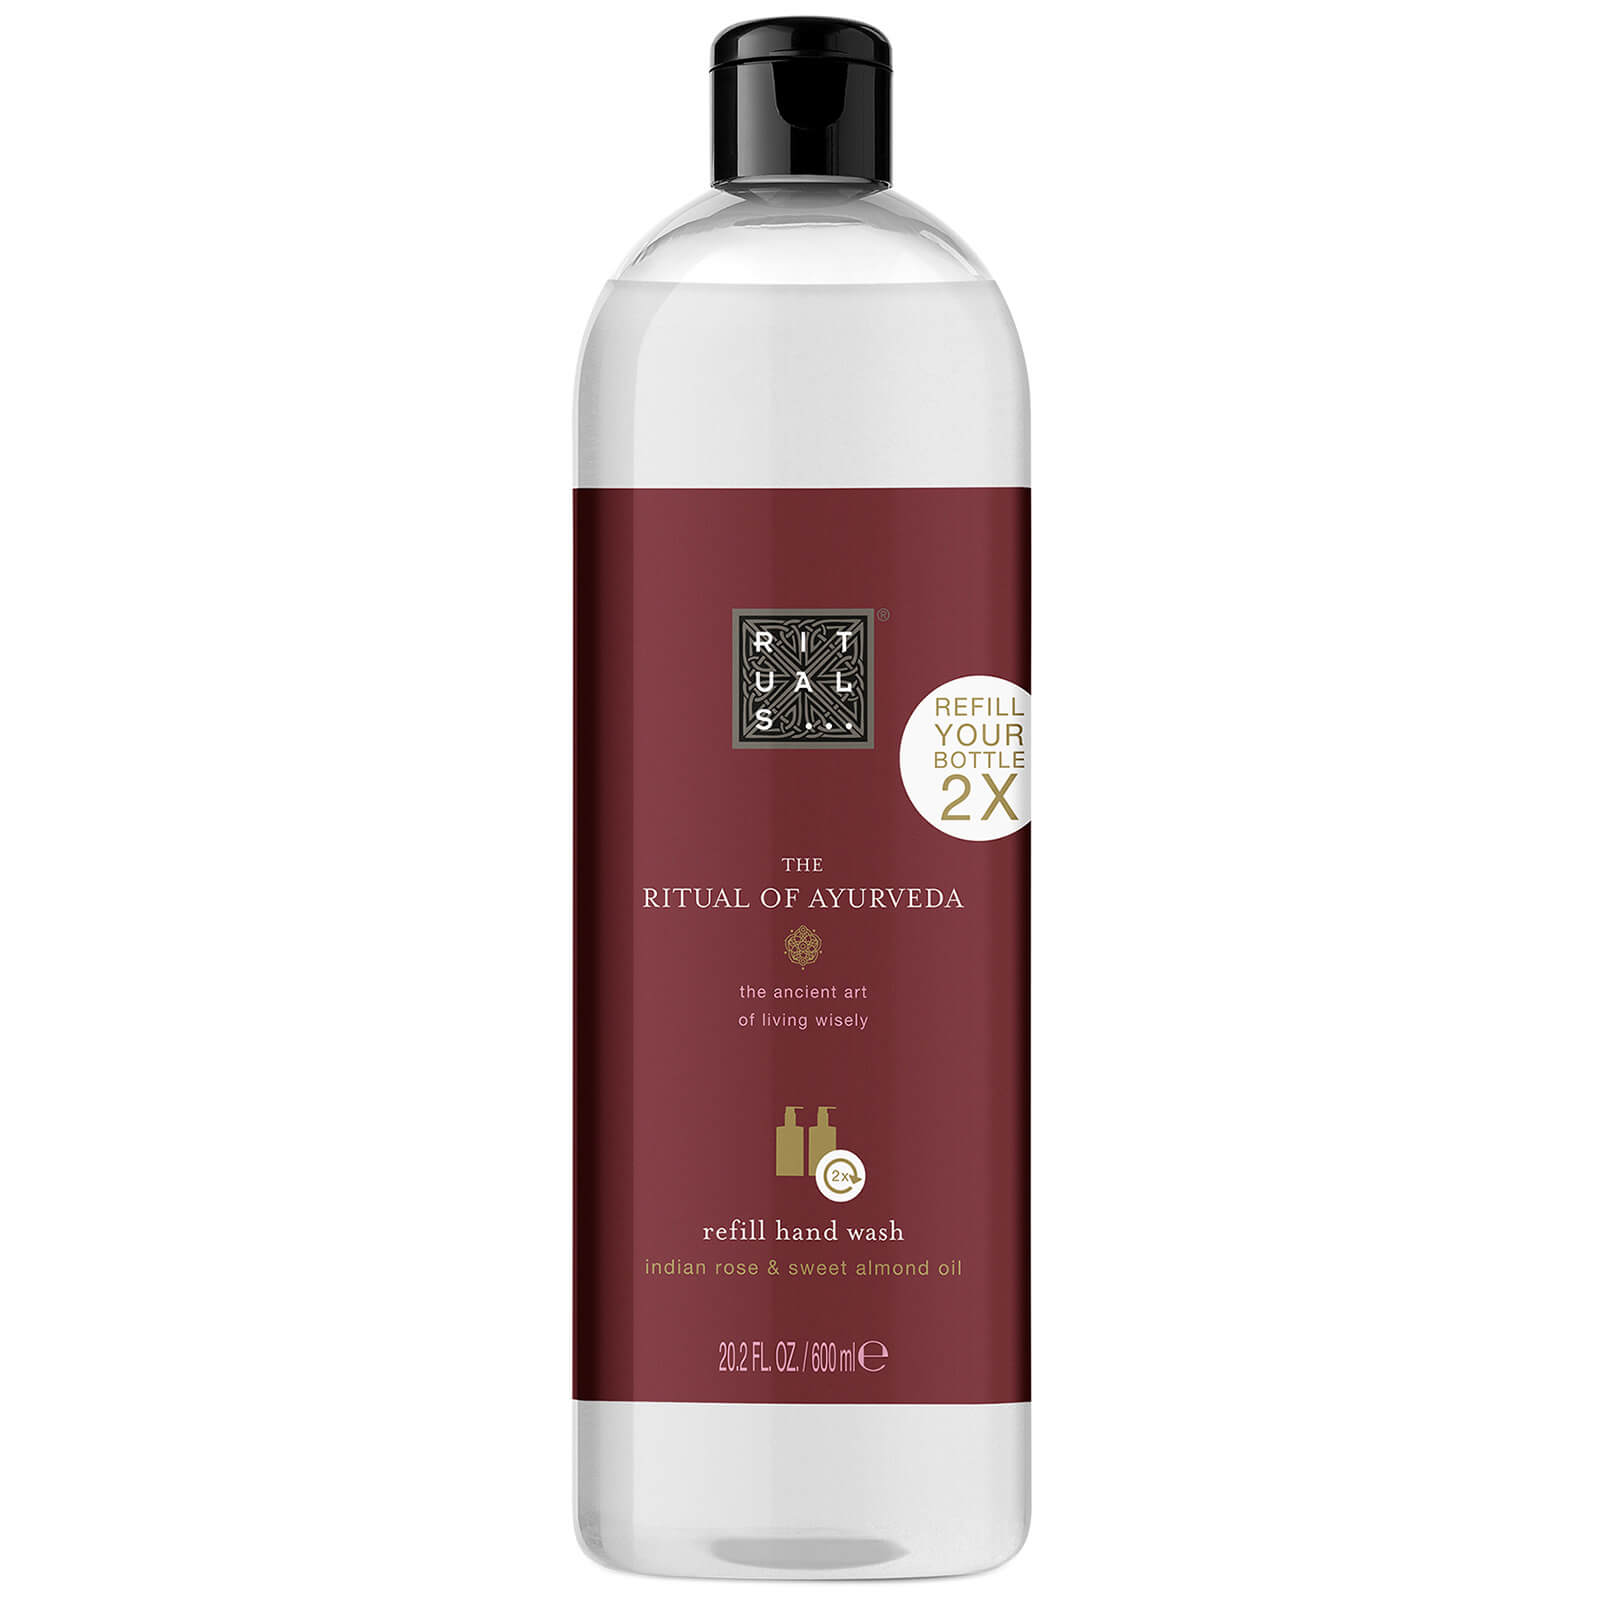 Sweet Almond and Indian Rose Hand Wash Refill - The Ritual of Ayurveda 600ml